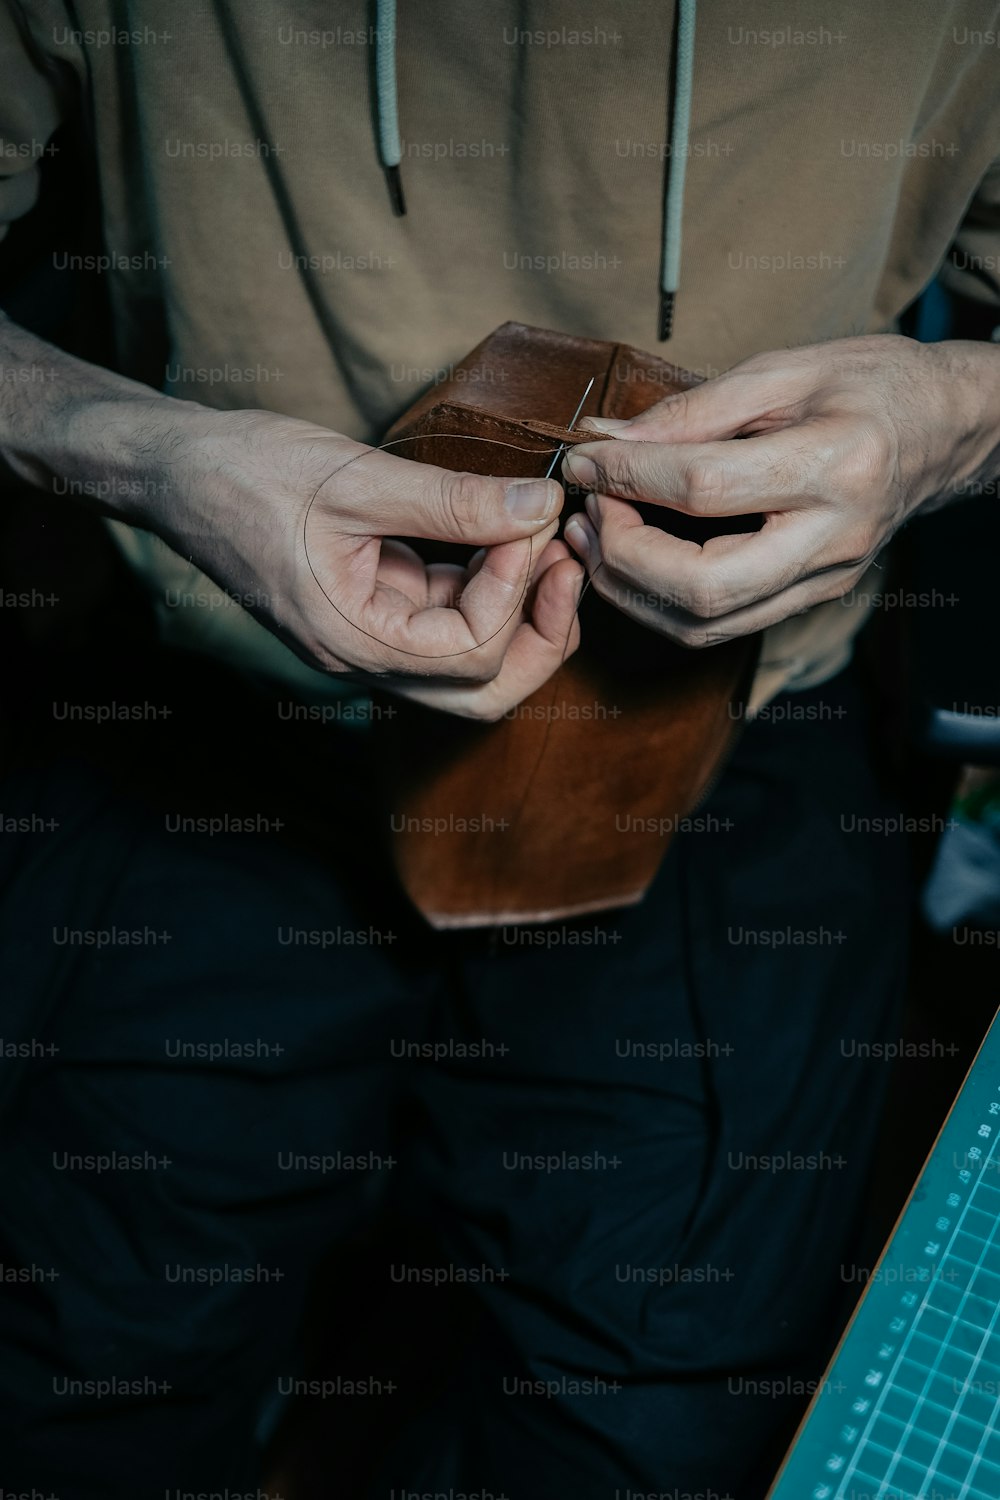 a person holding a piece of wood in their hands